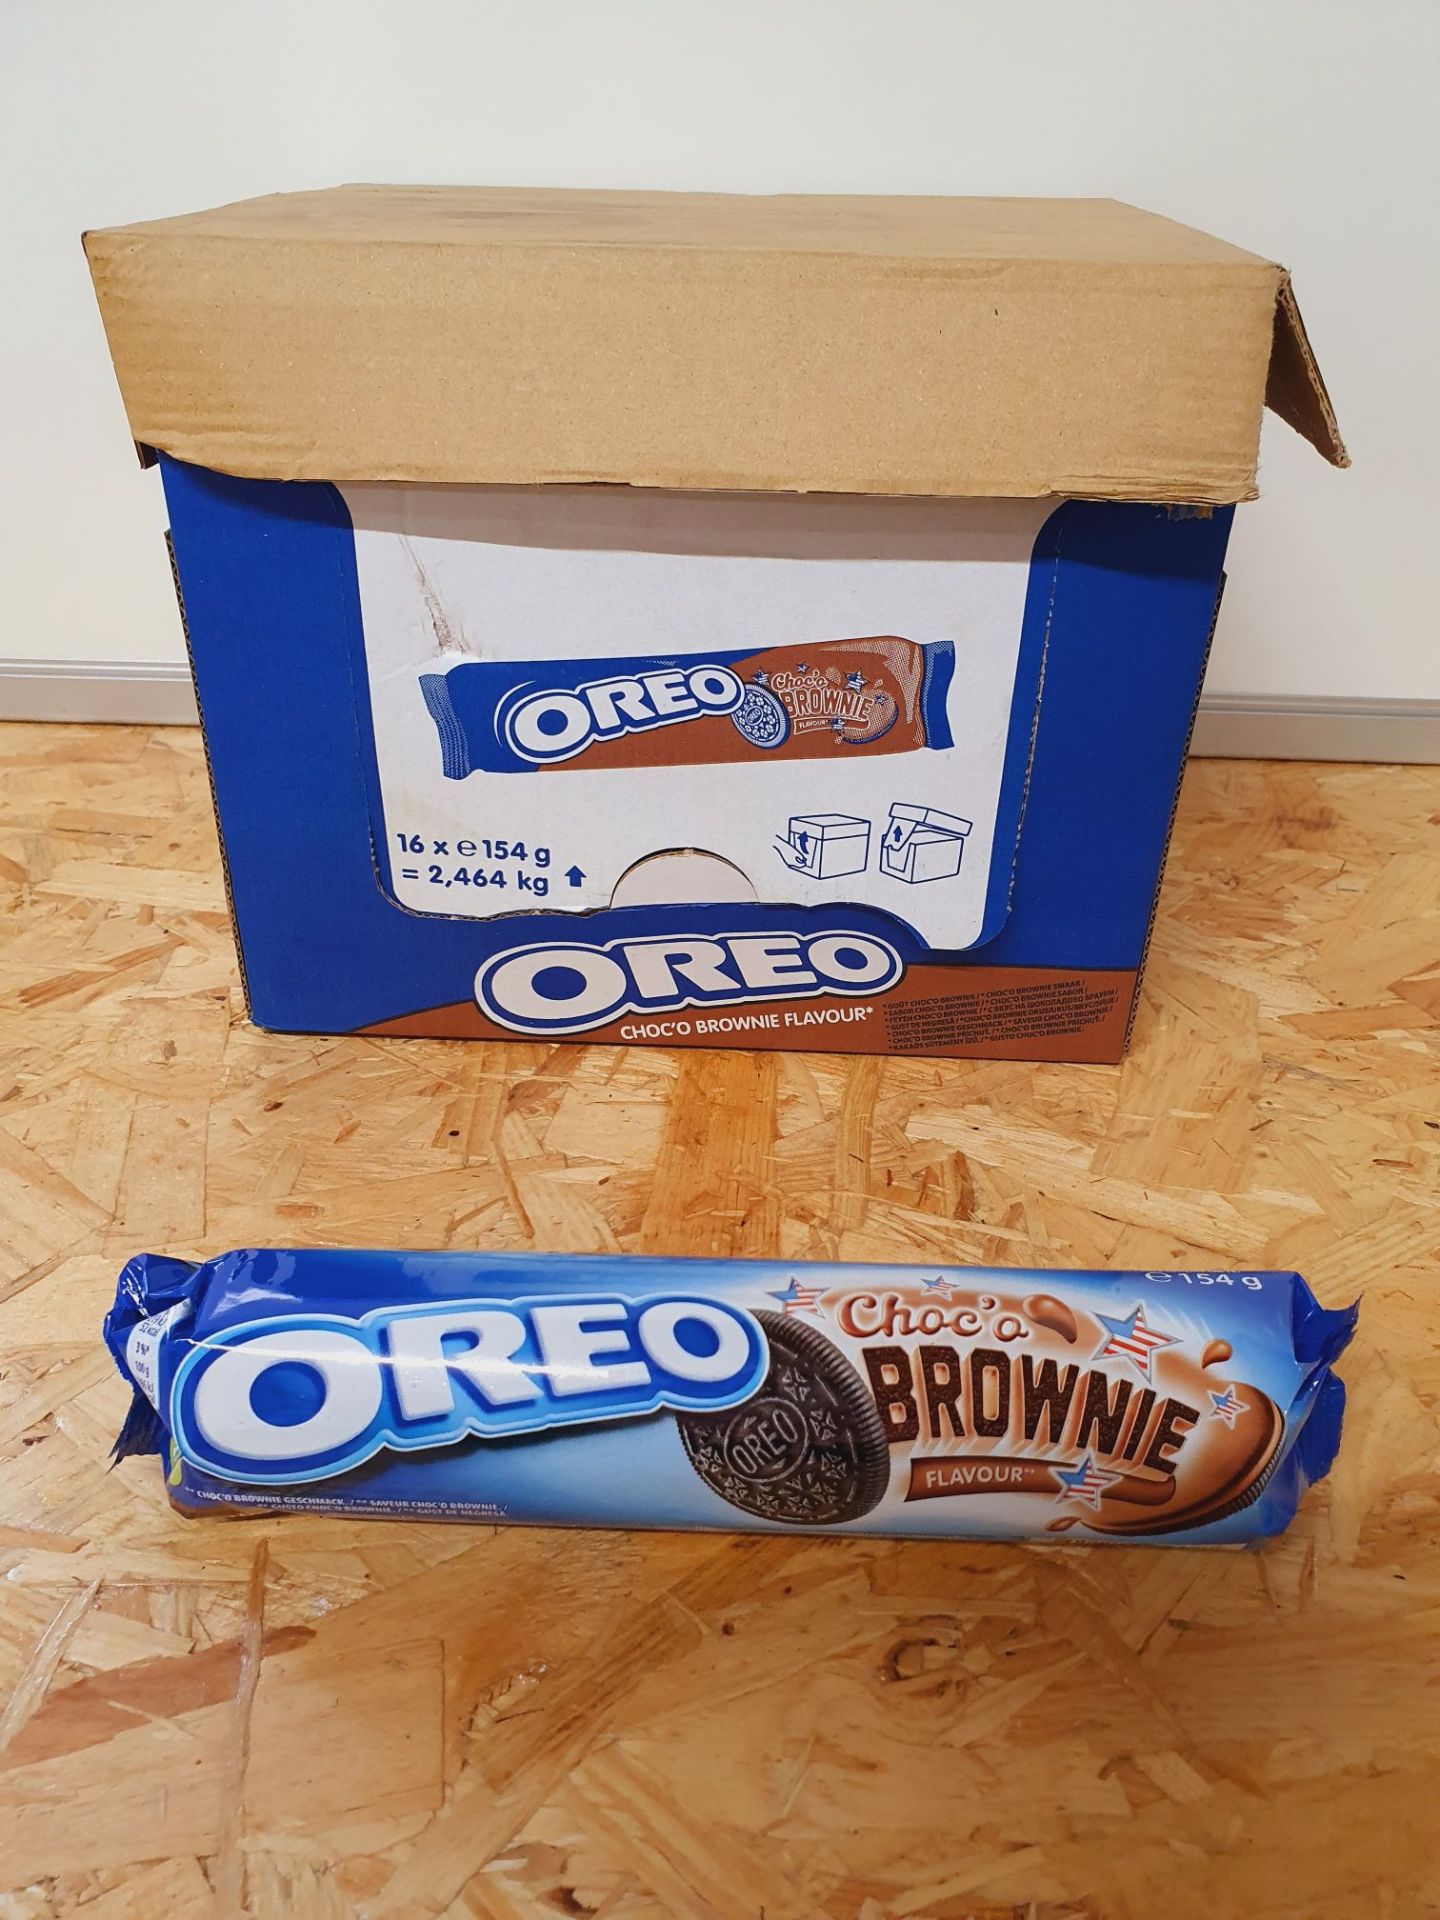 ONE LOT TO CONTAIN ONE BOX OF OREO CHOCOLATE BROWNIE COOKIES. 16 PACKS IN BOX, EACH PACK 154G. BEST